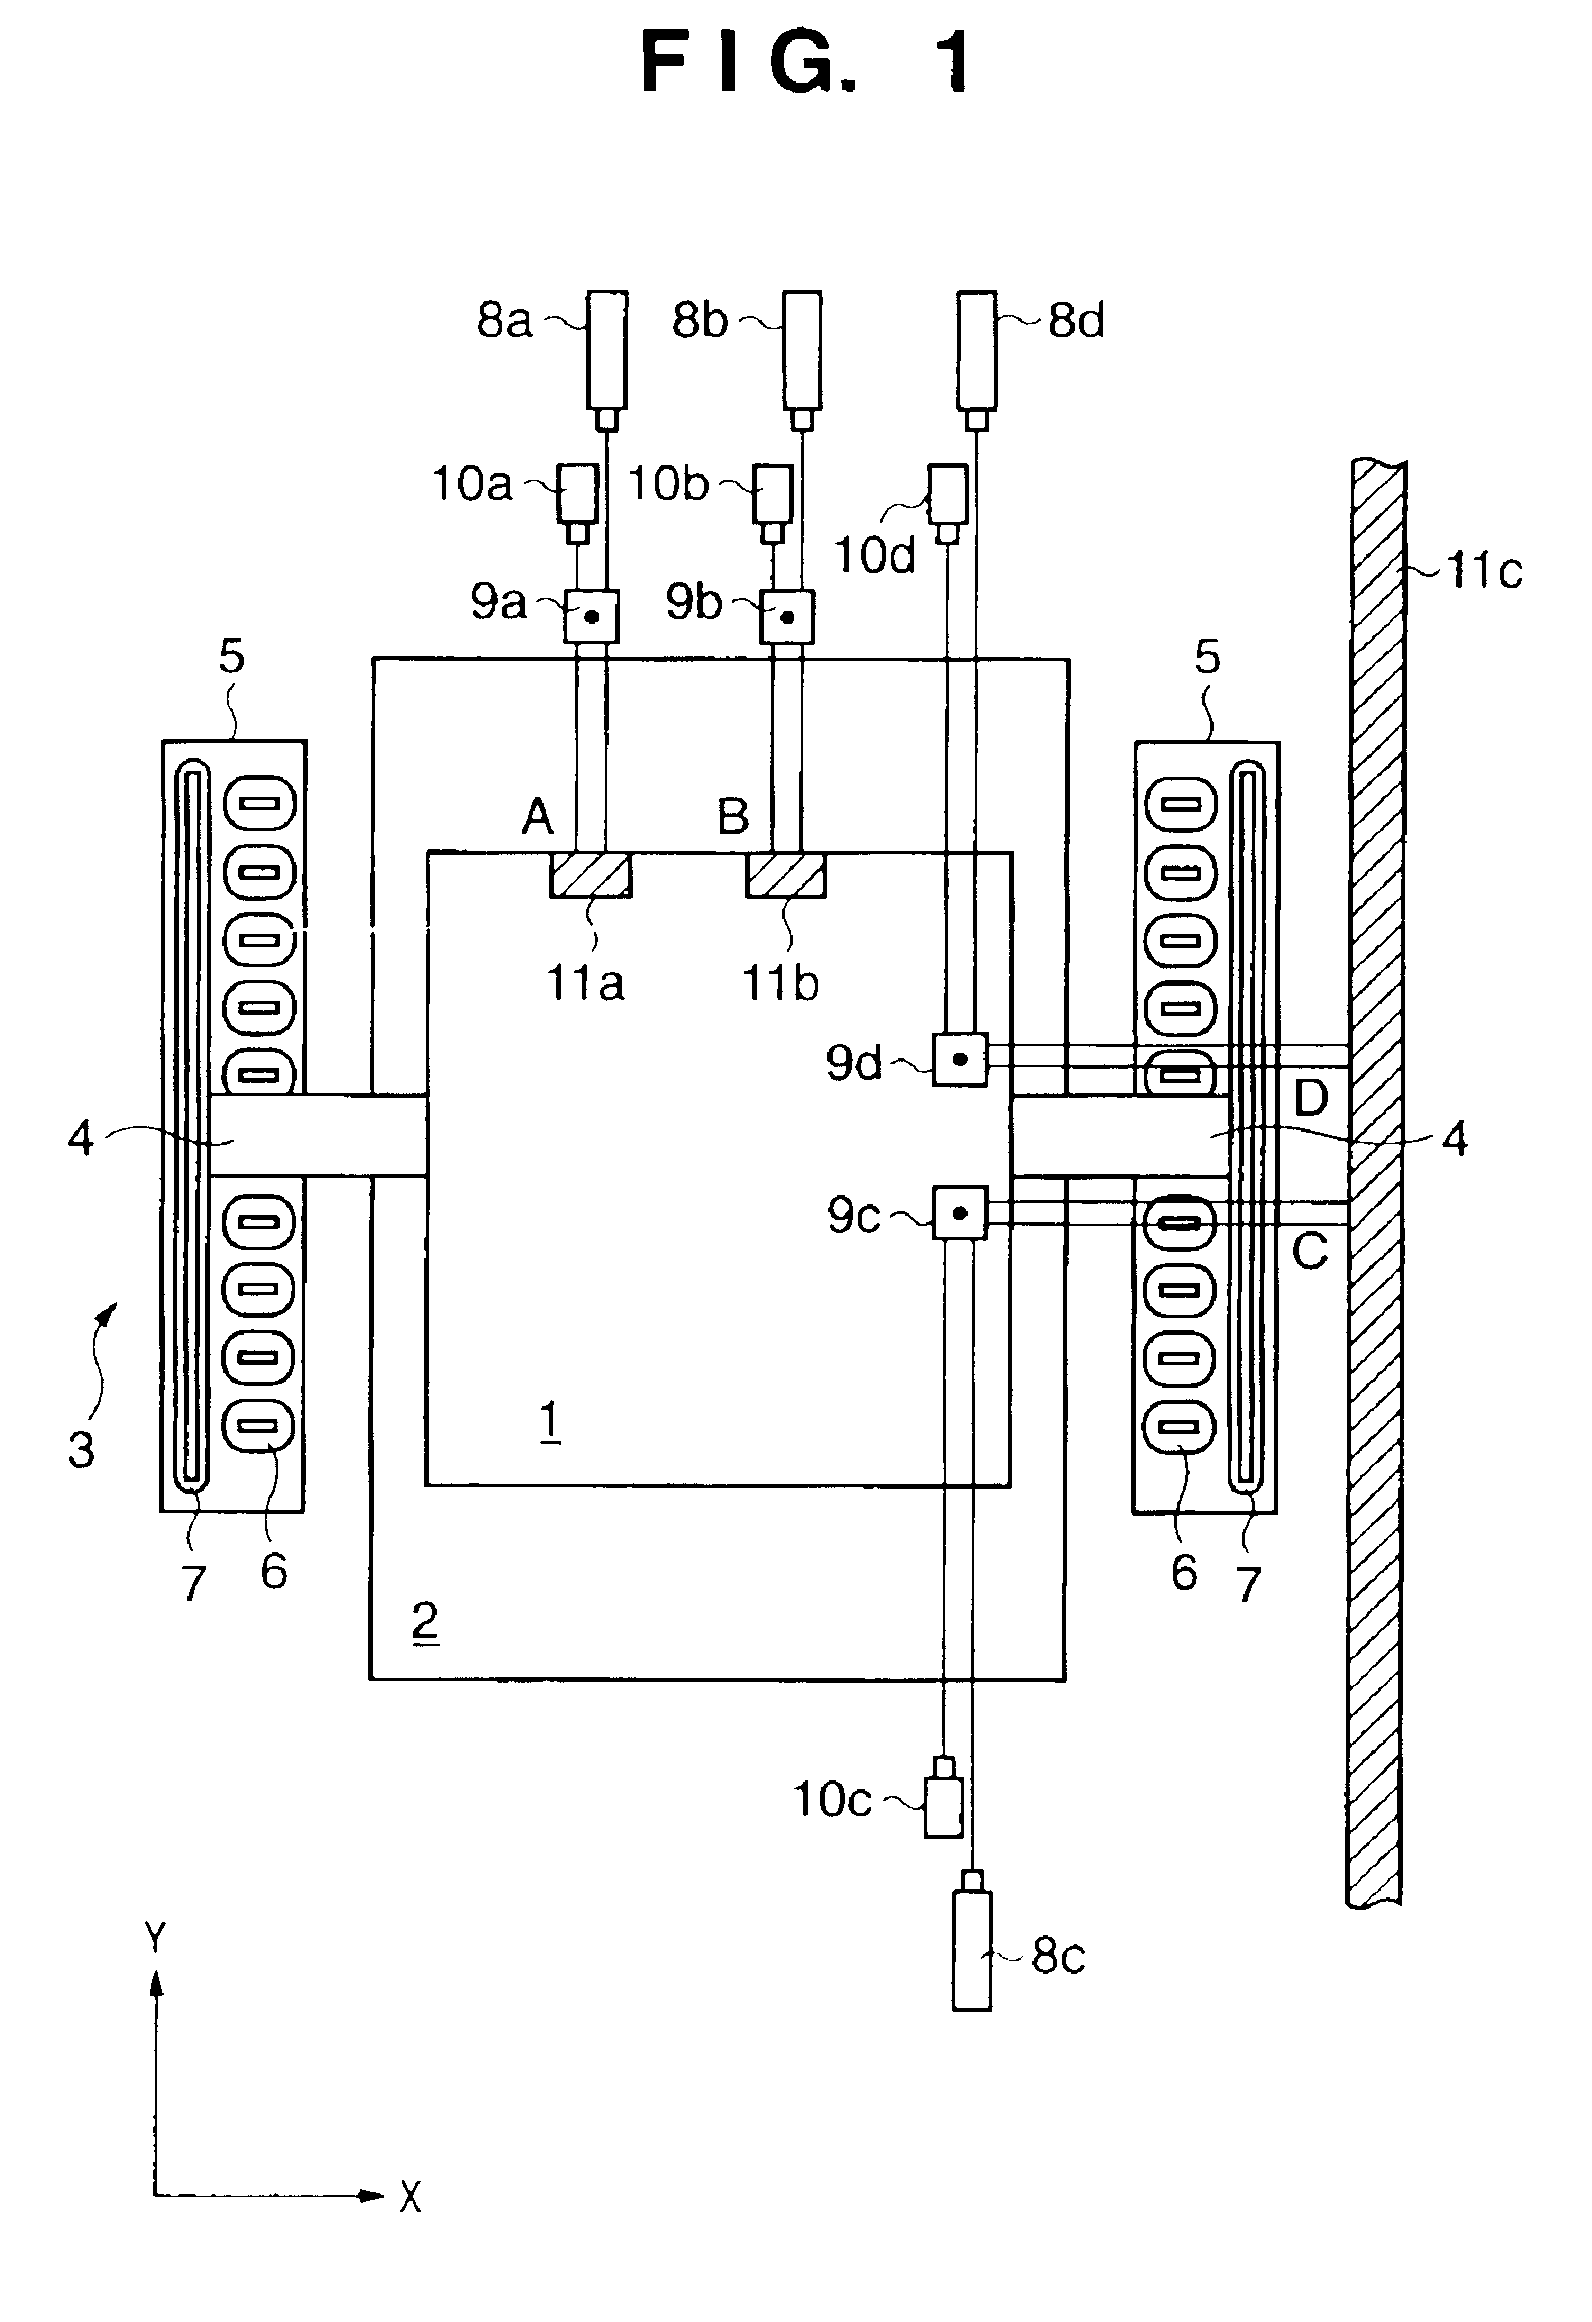 Stage apparatus which supports interferometer, stage position measurement method, projection exposure apparatus, projection exposure apparatus maintenance method, semiconductor device manufacturing method, and semiconductor manufacturing factory